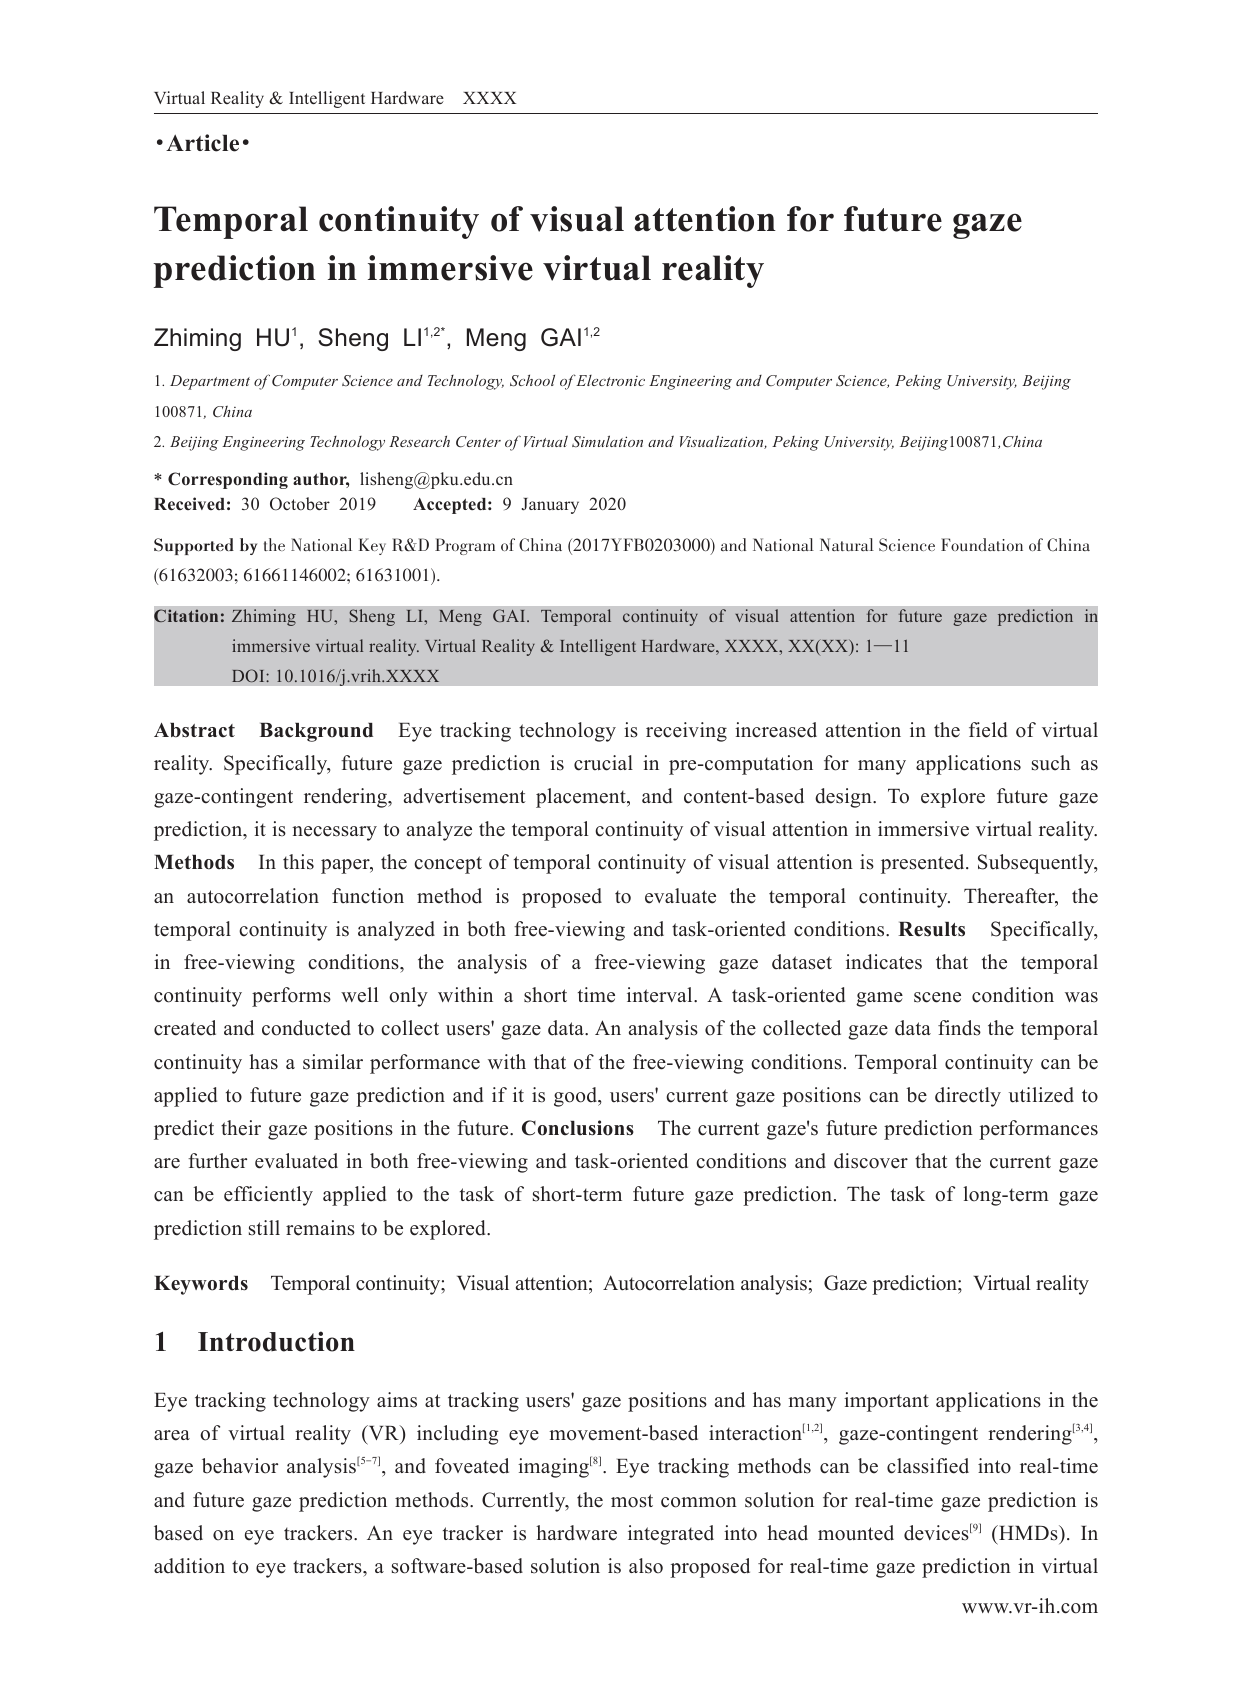 Temporal continuity of visual attention for future gaze prediction in immersive virtual reality